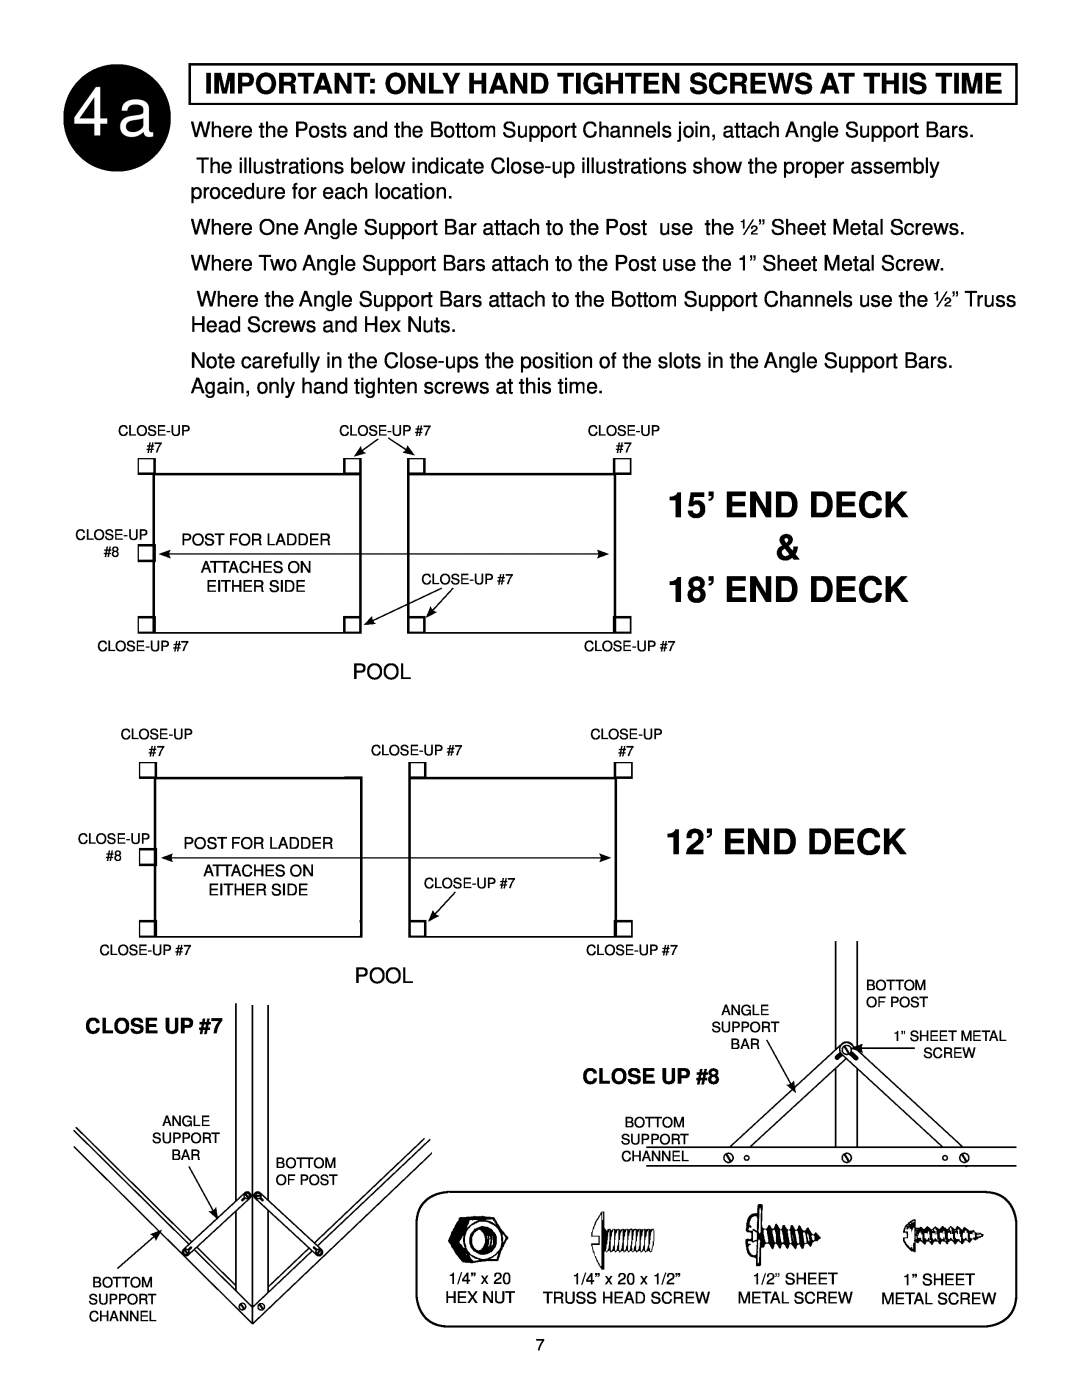 Swim'n Play end deck manual 15’ END DECK, 18’ END DECK, 12’ END DECK, Important Only Hand Tighten Screws At This Time 